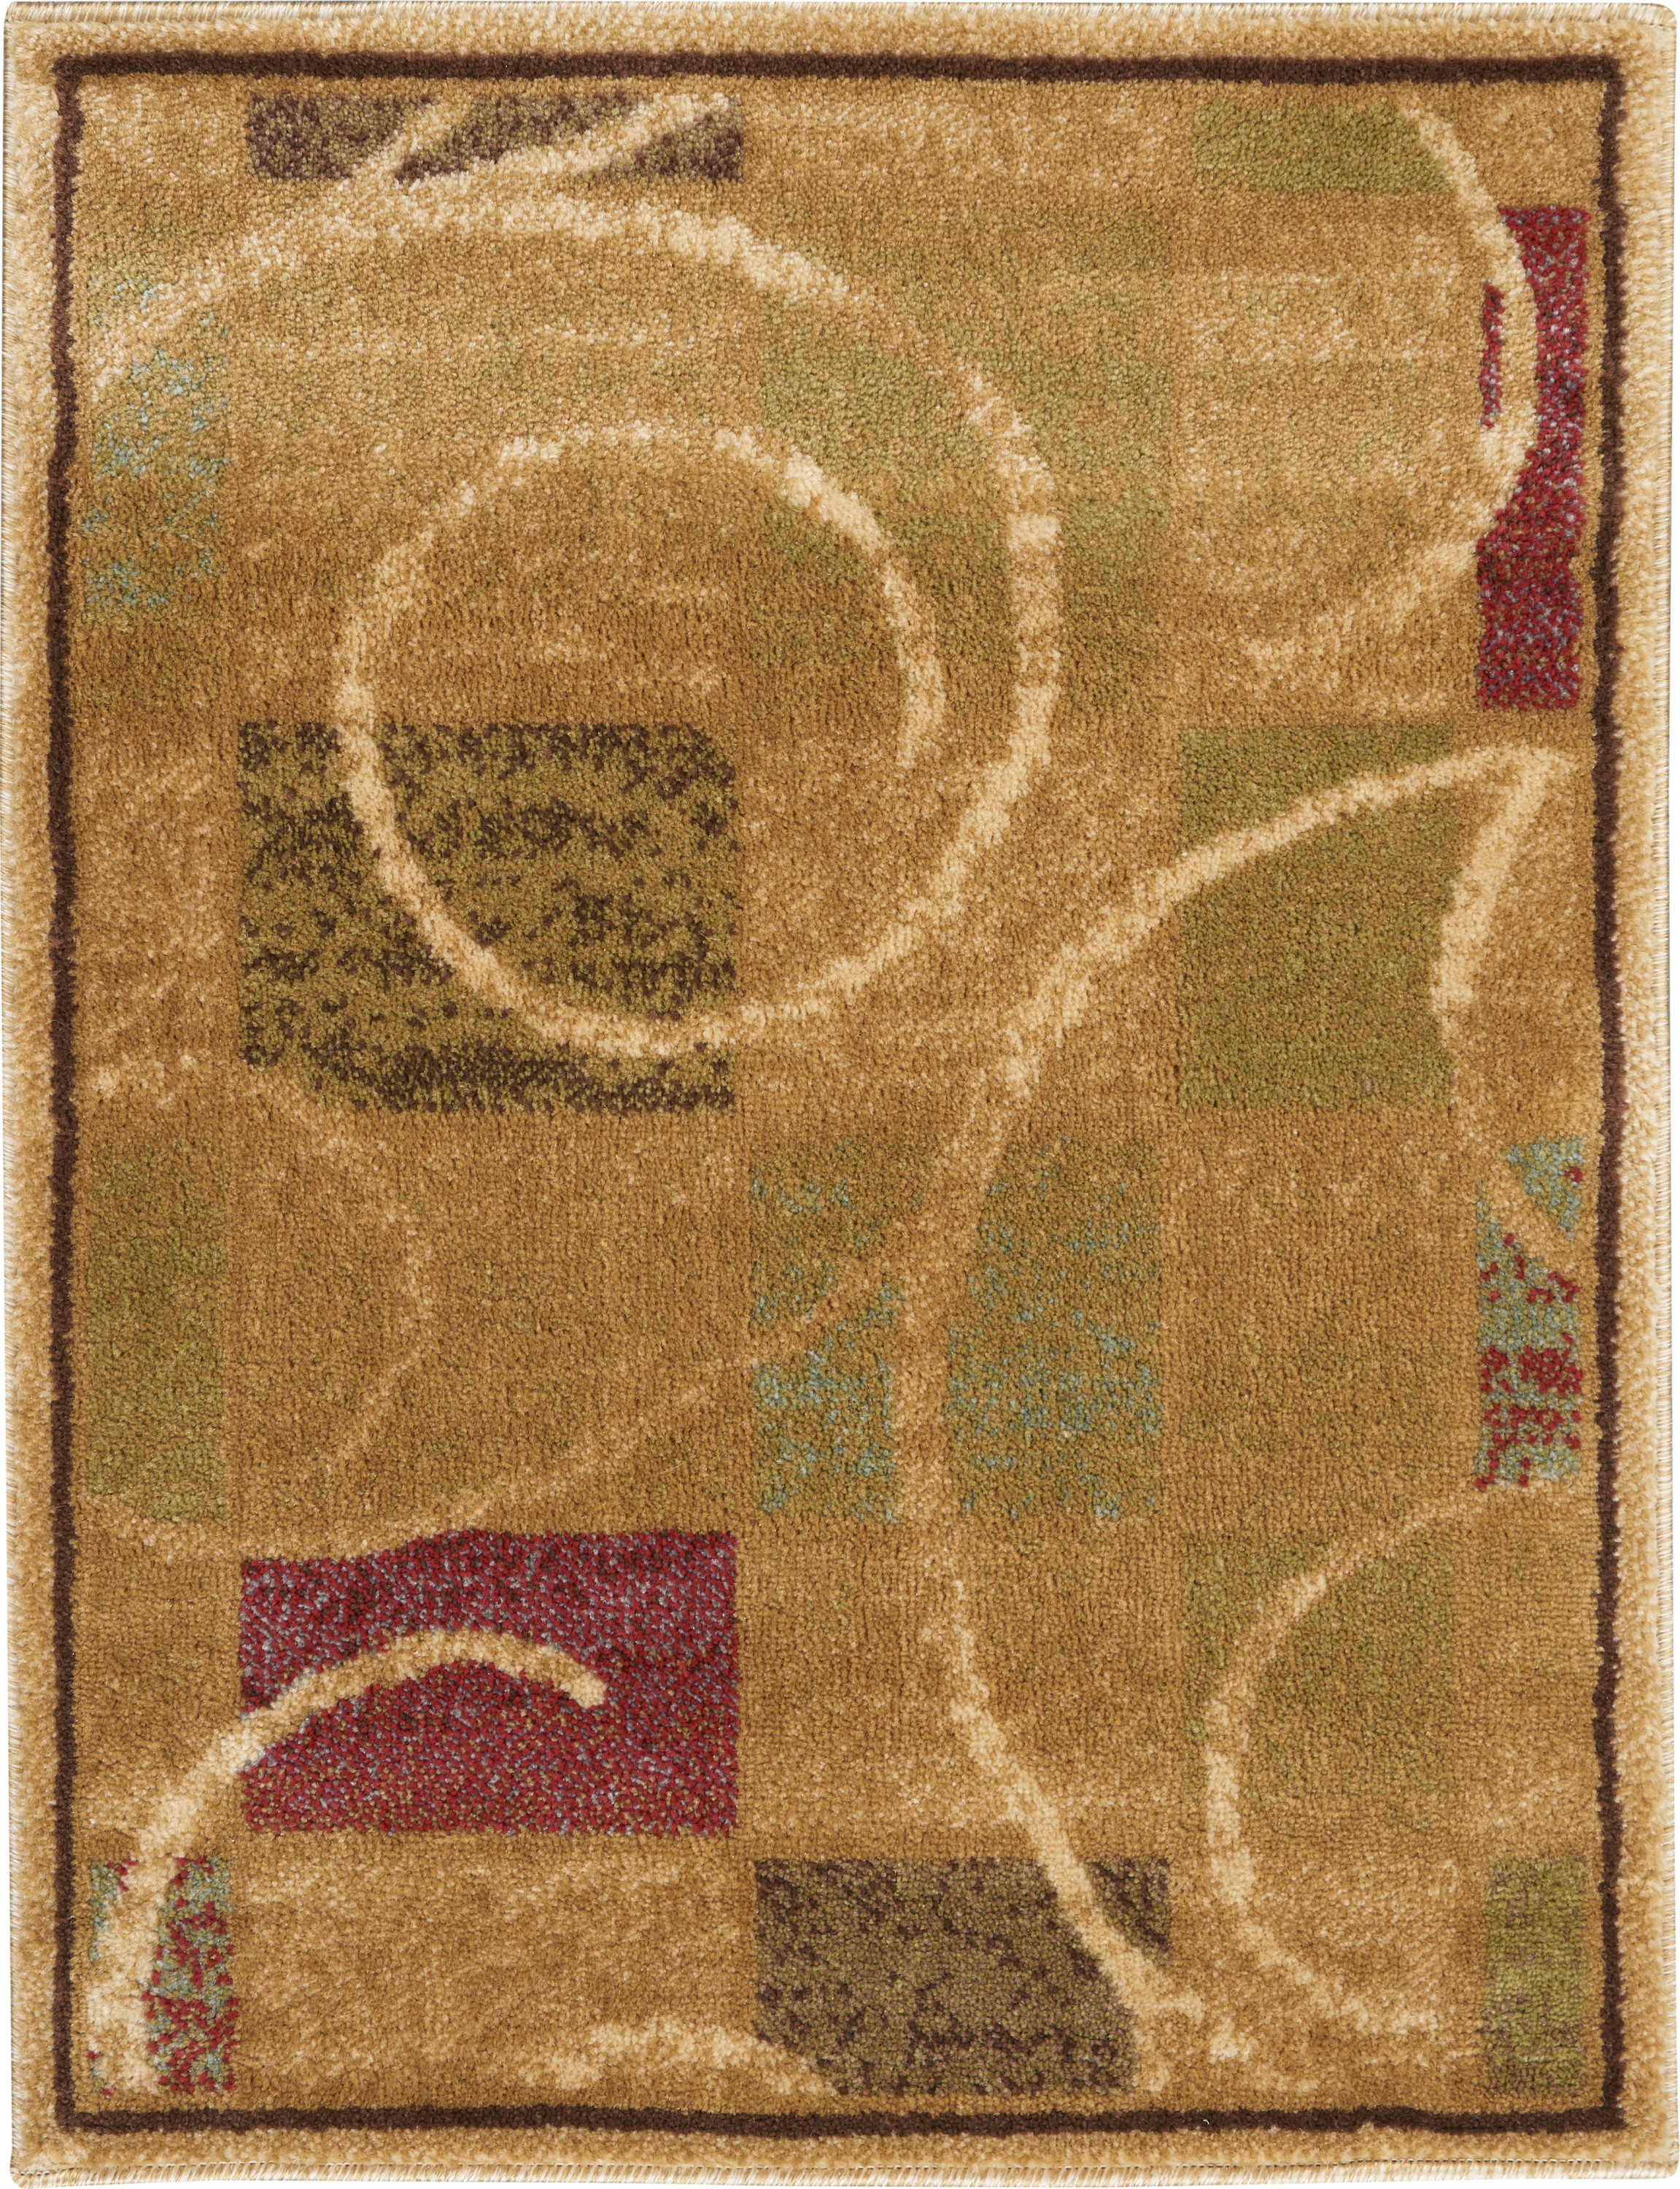 Nourison Expressions Modern Beige 2' x 2'9" Area Rug, (2x3) - image 2 of 8